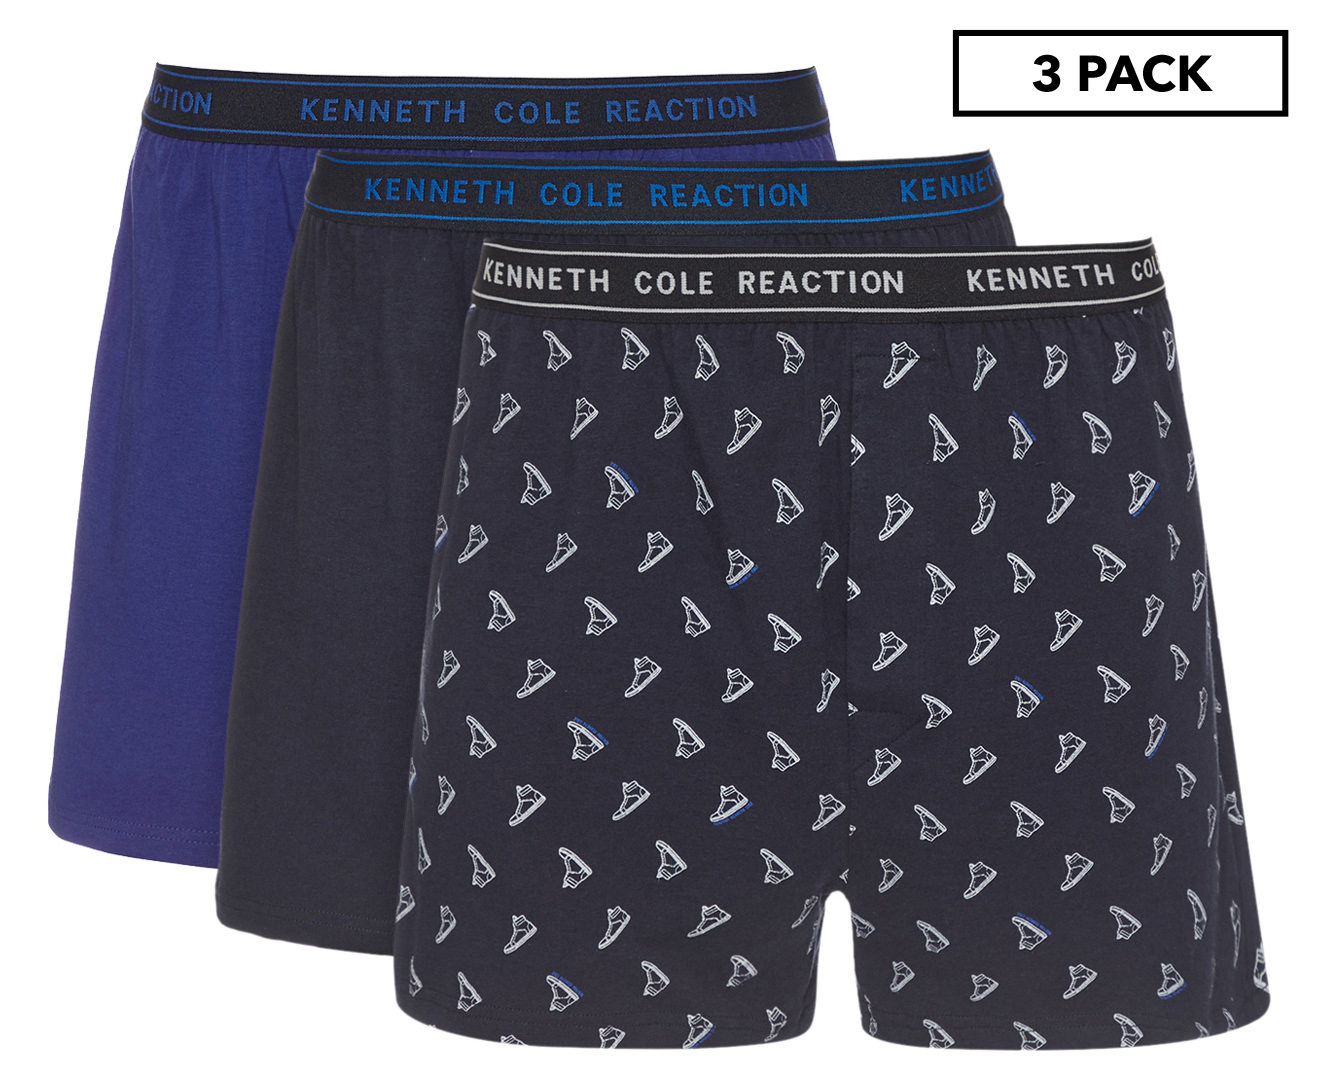 Kenneth Cole Men's Stretch Cotton Knit Boxers 3-Pack - Navy/Blue ...